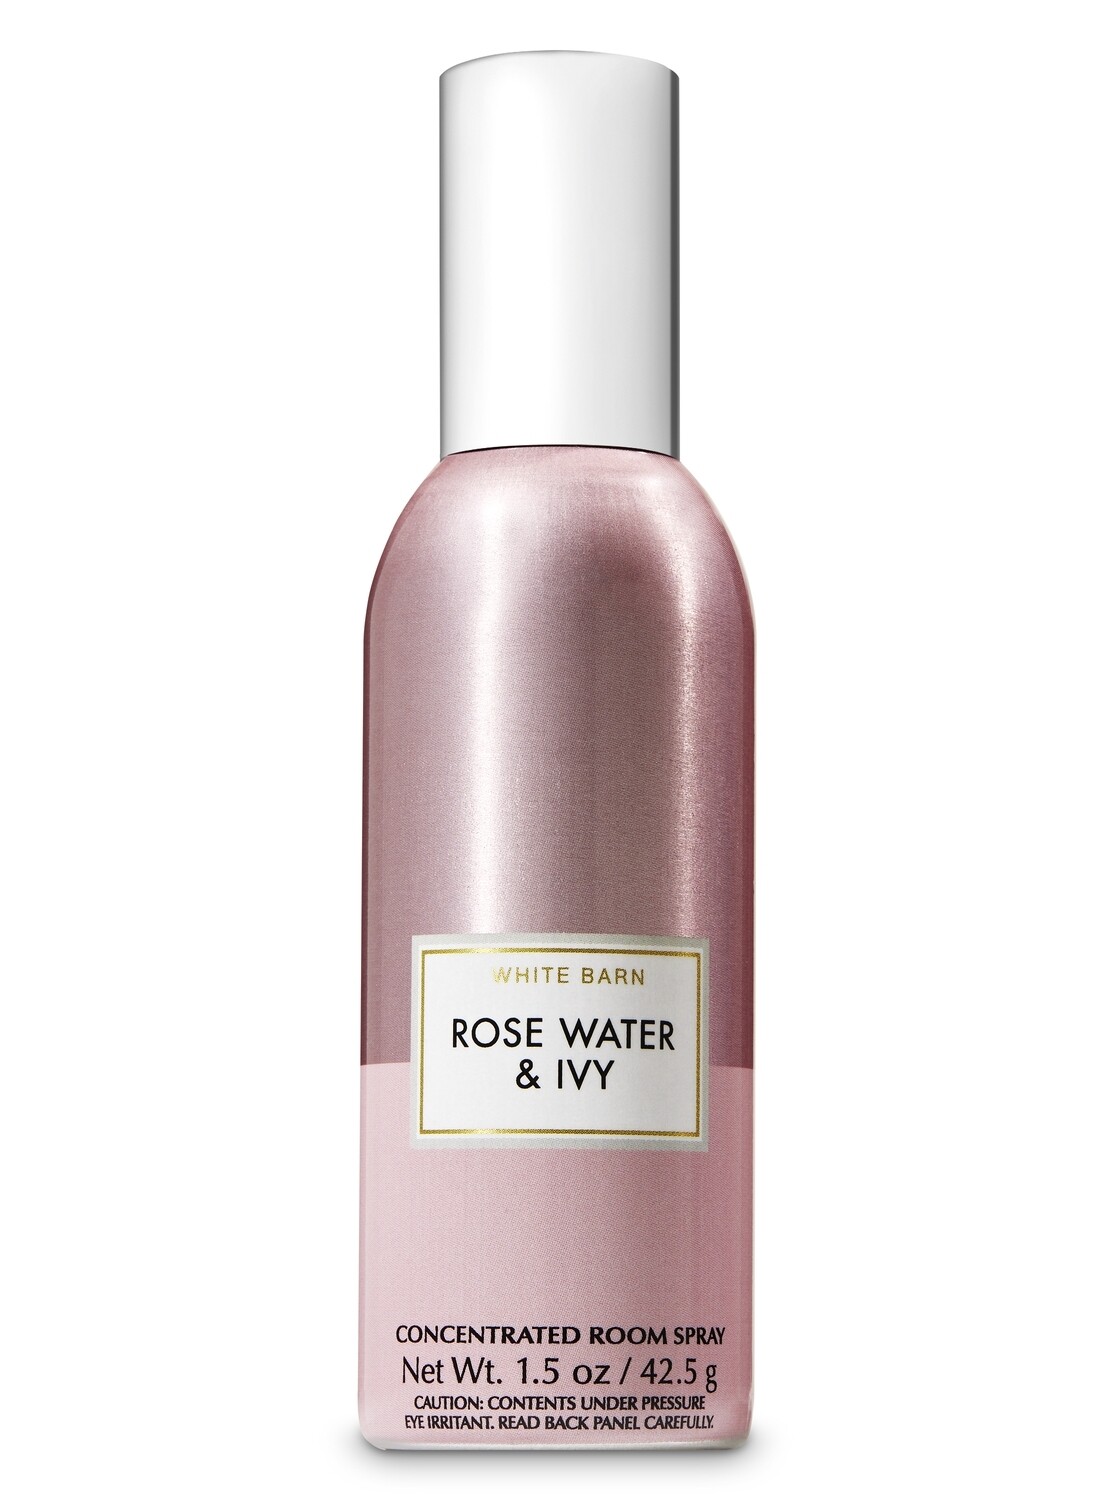 ROSE WATER AND IVY- Concentrated Room Spray